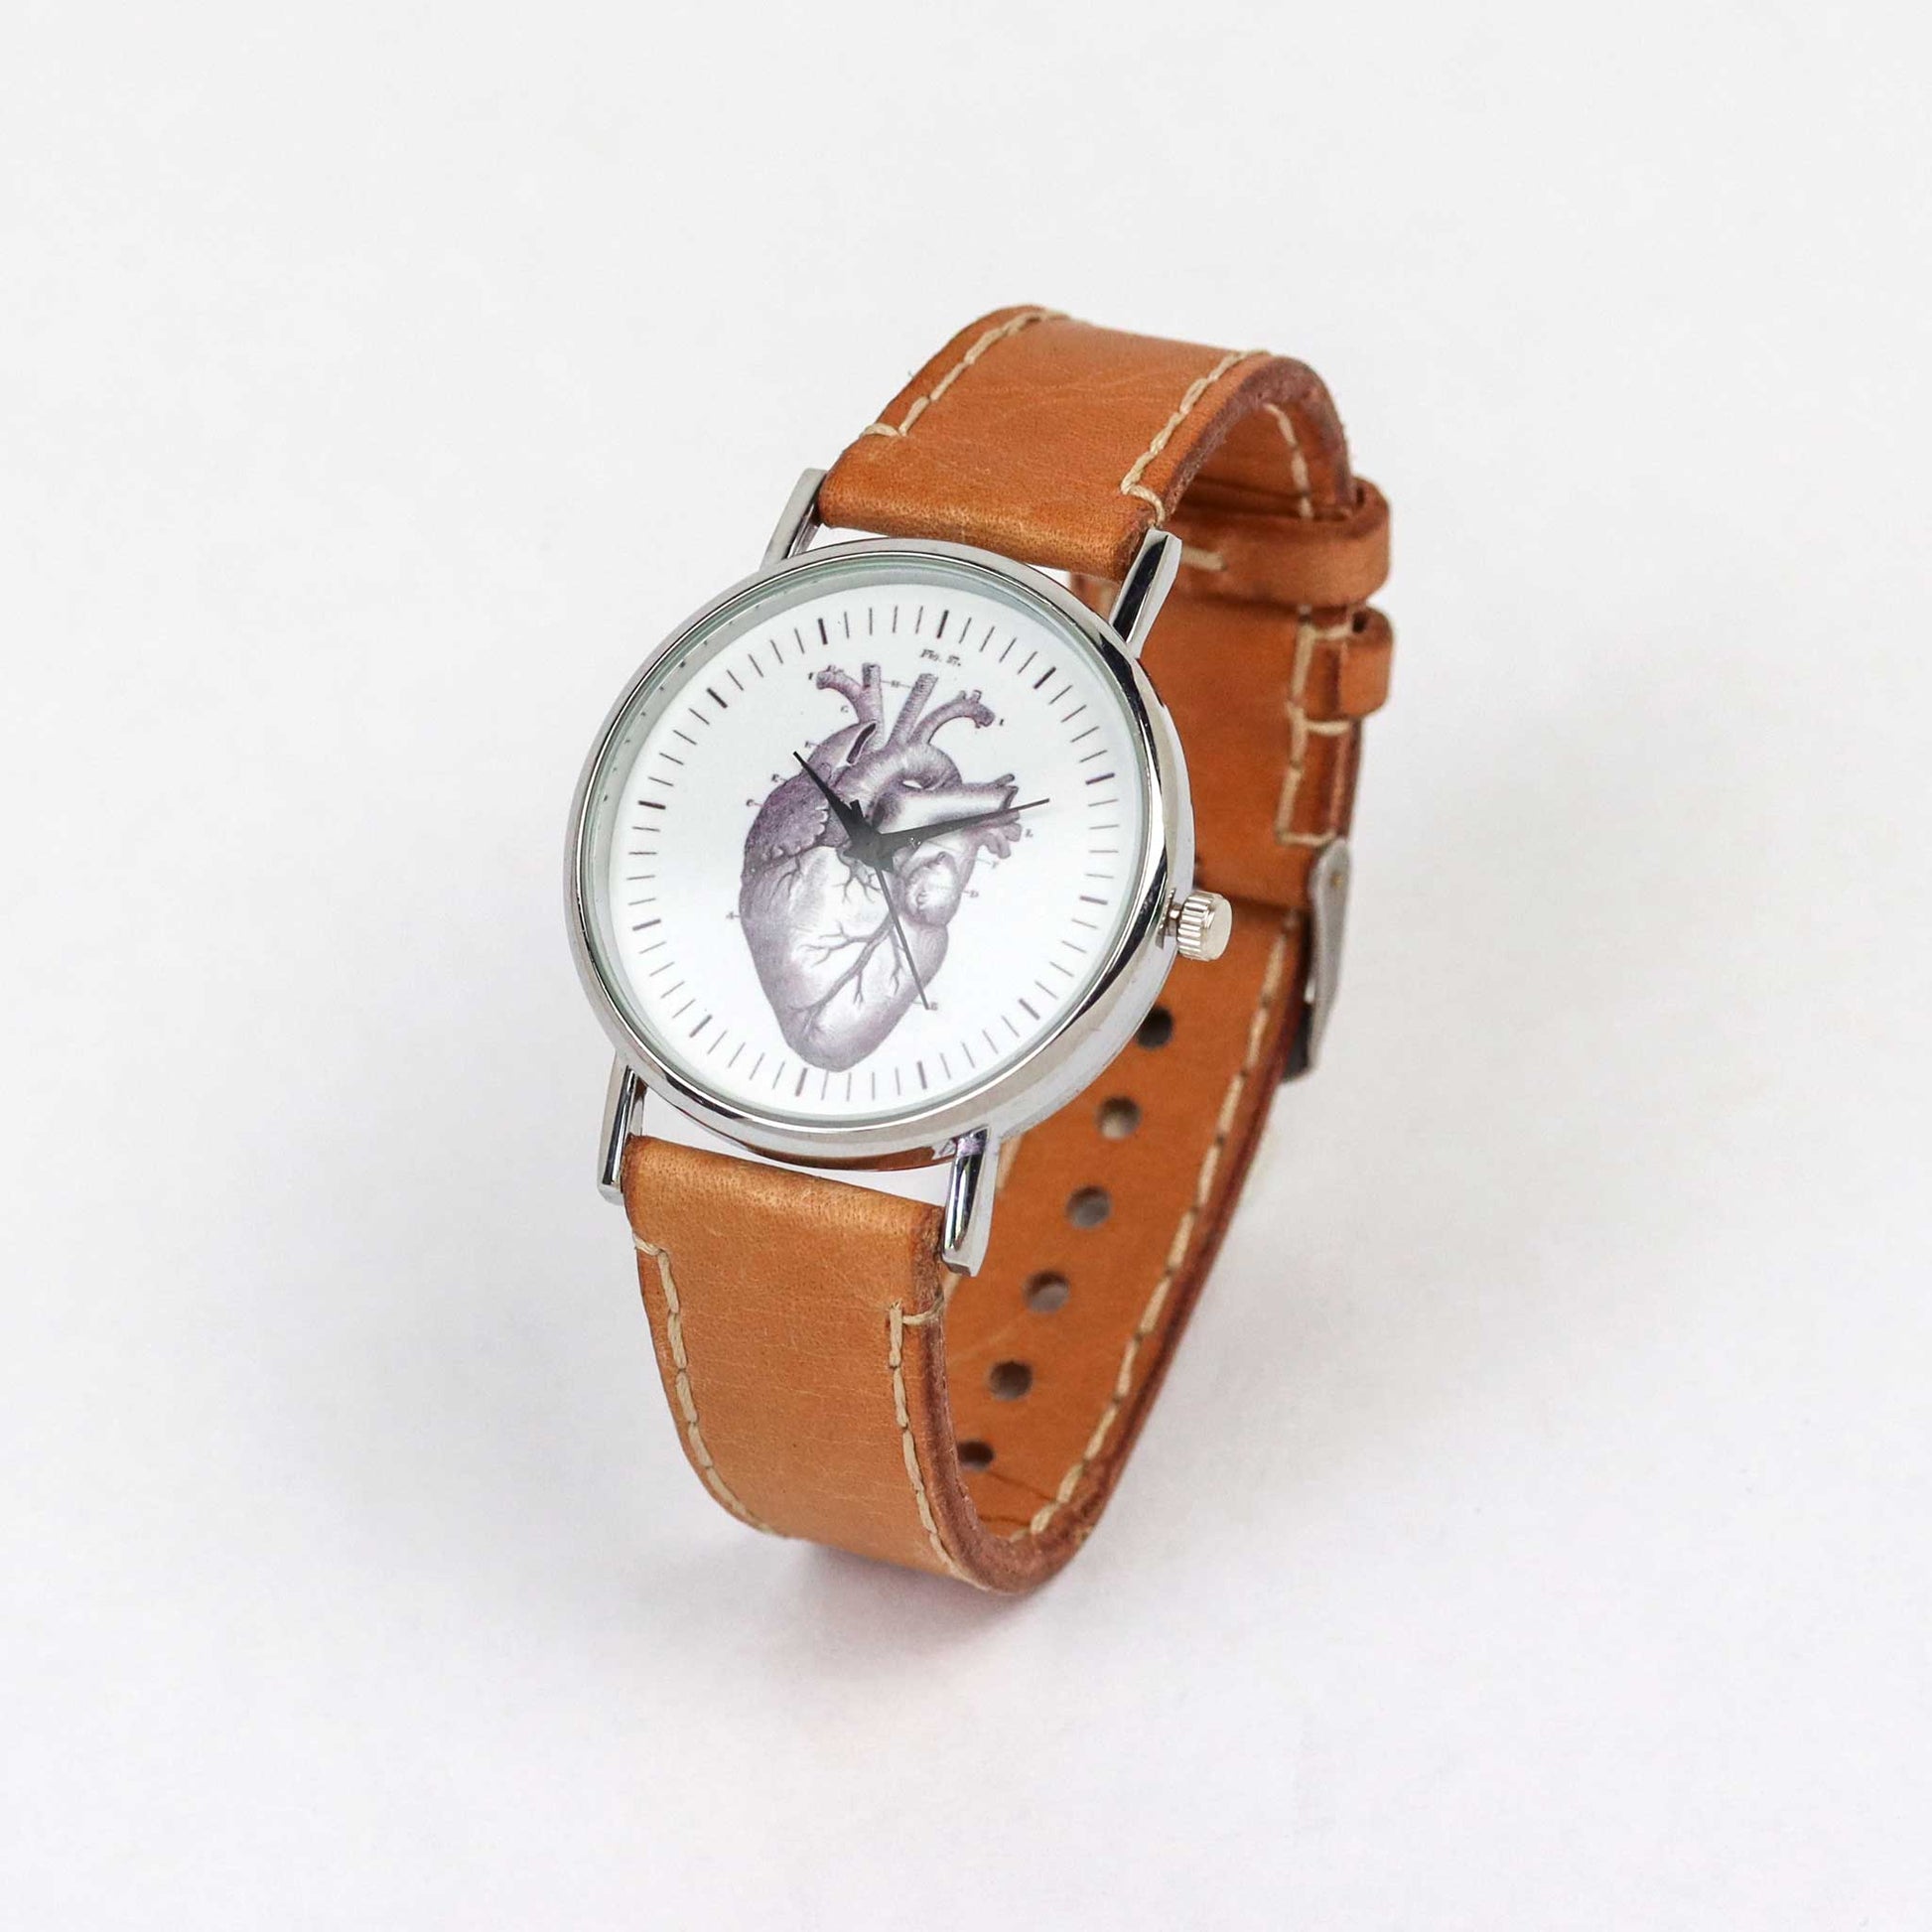 Brown leather wrist watch with a heart